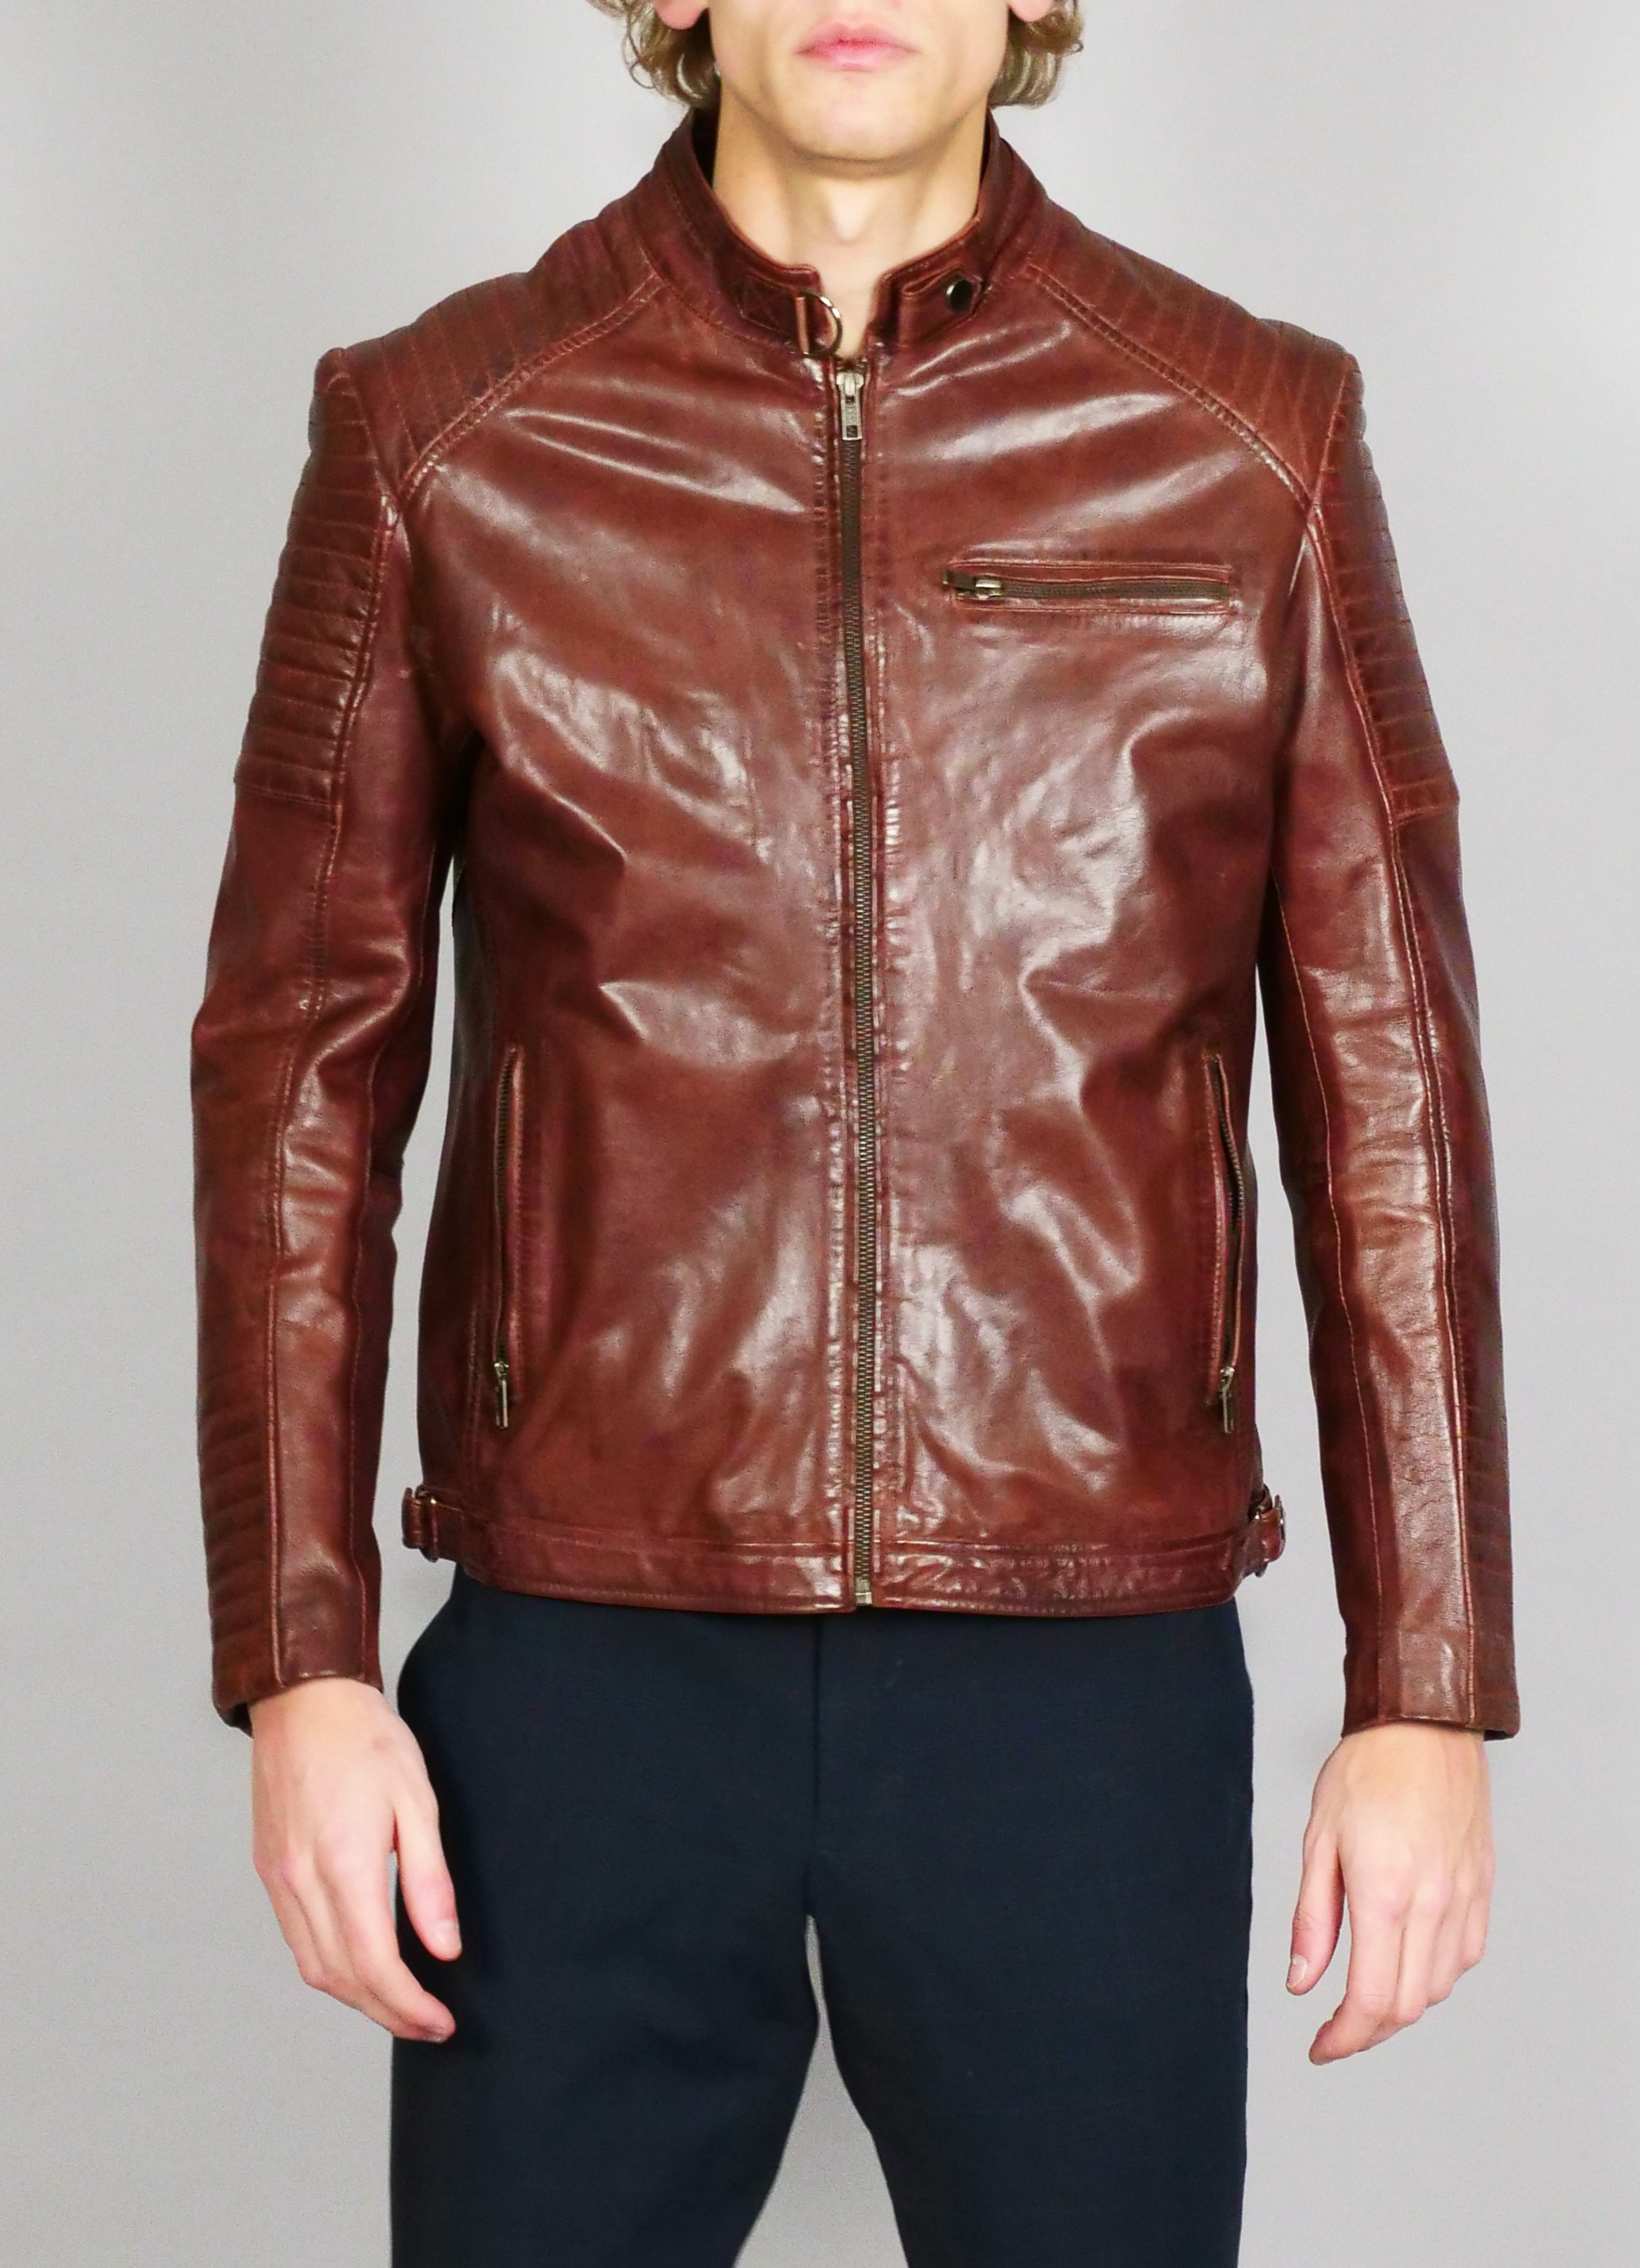 15 Really Good Outfits: How to Wear a Brown Leather Jacket - Be So You